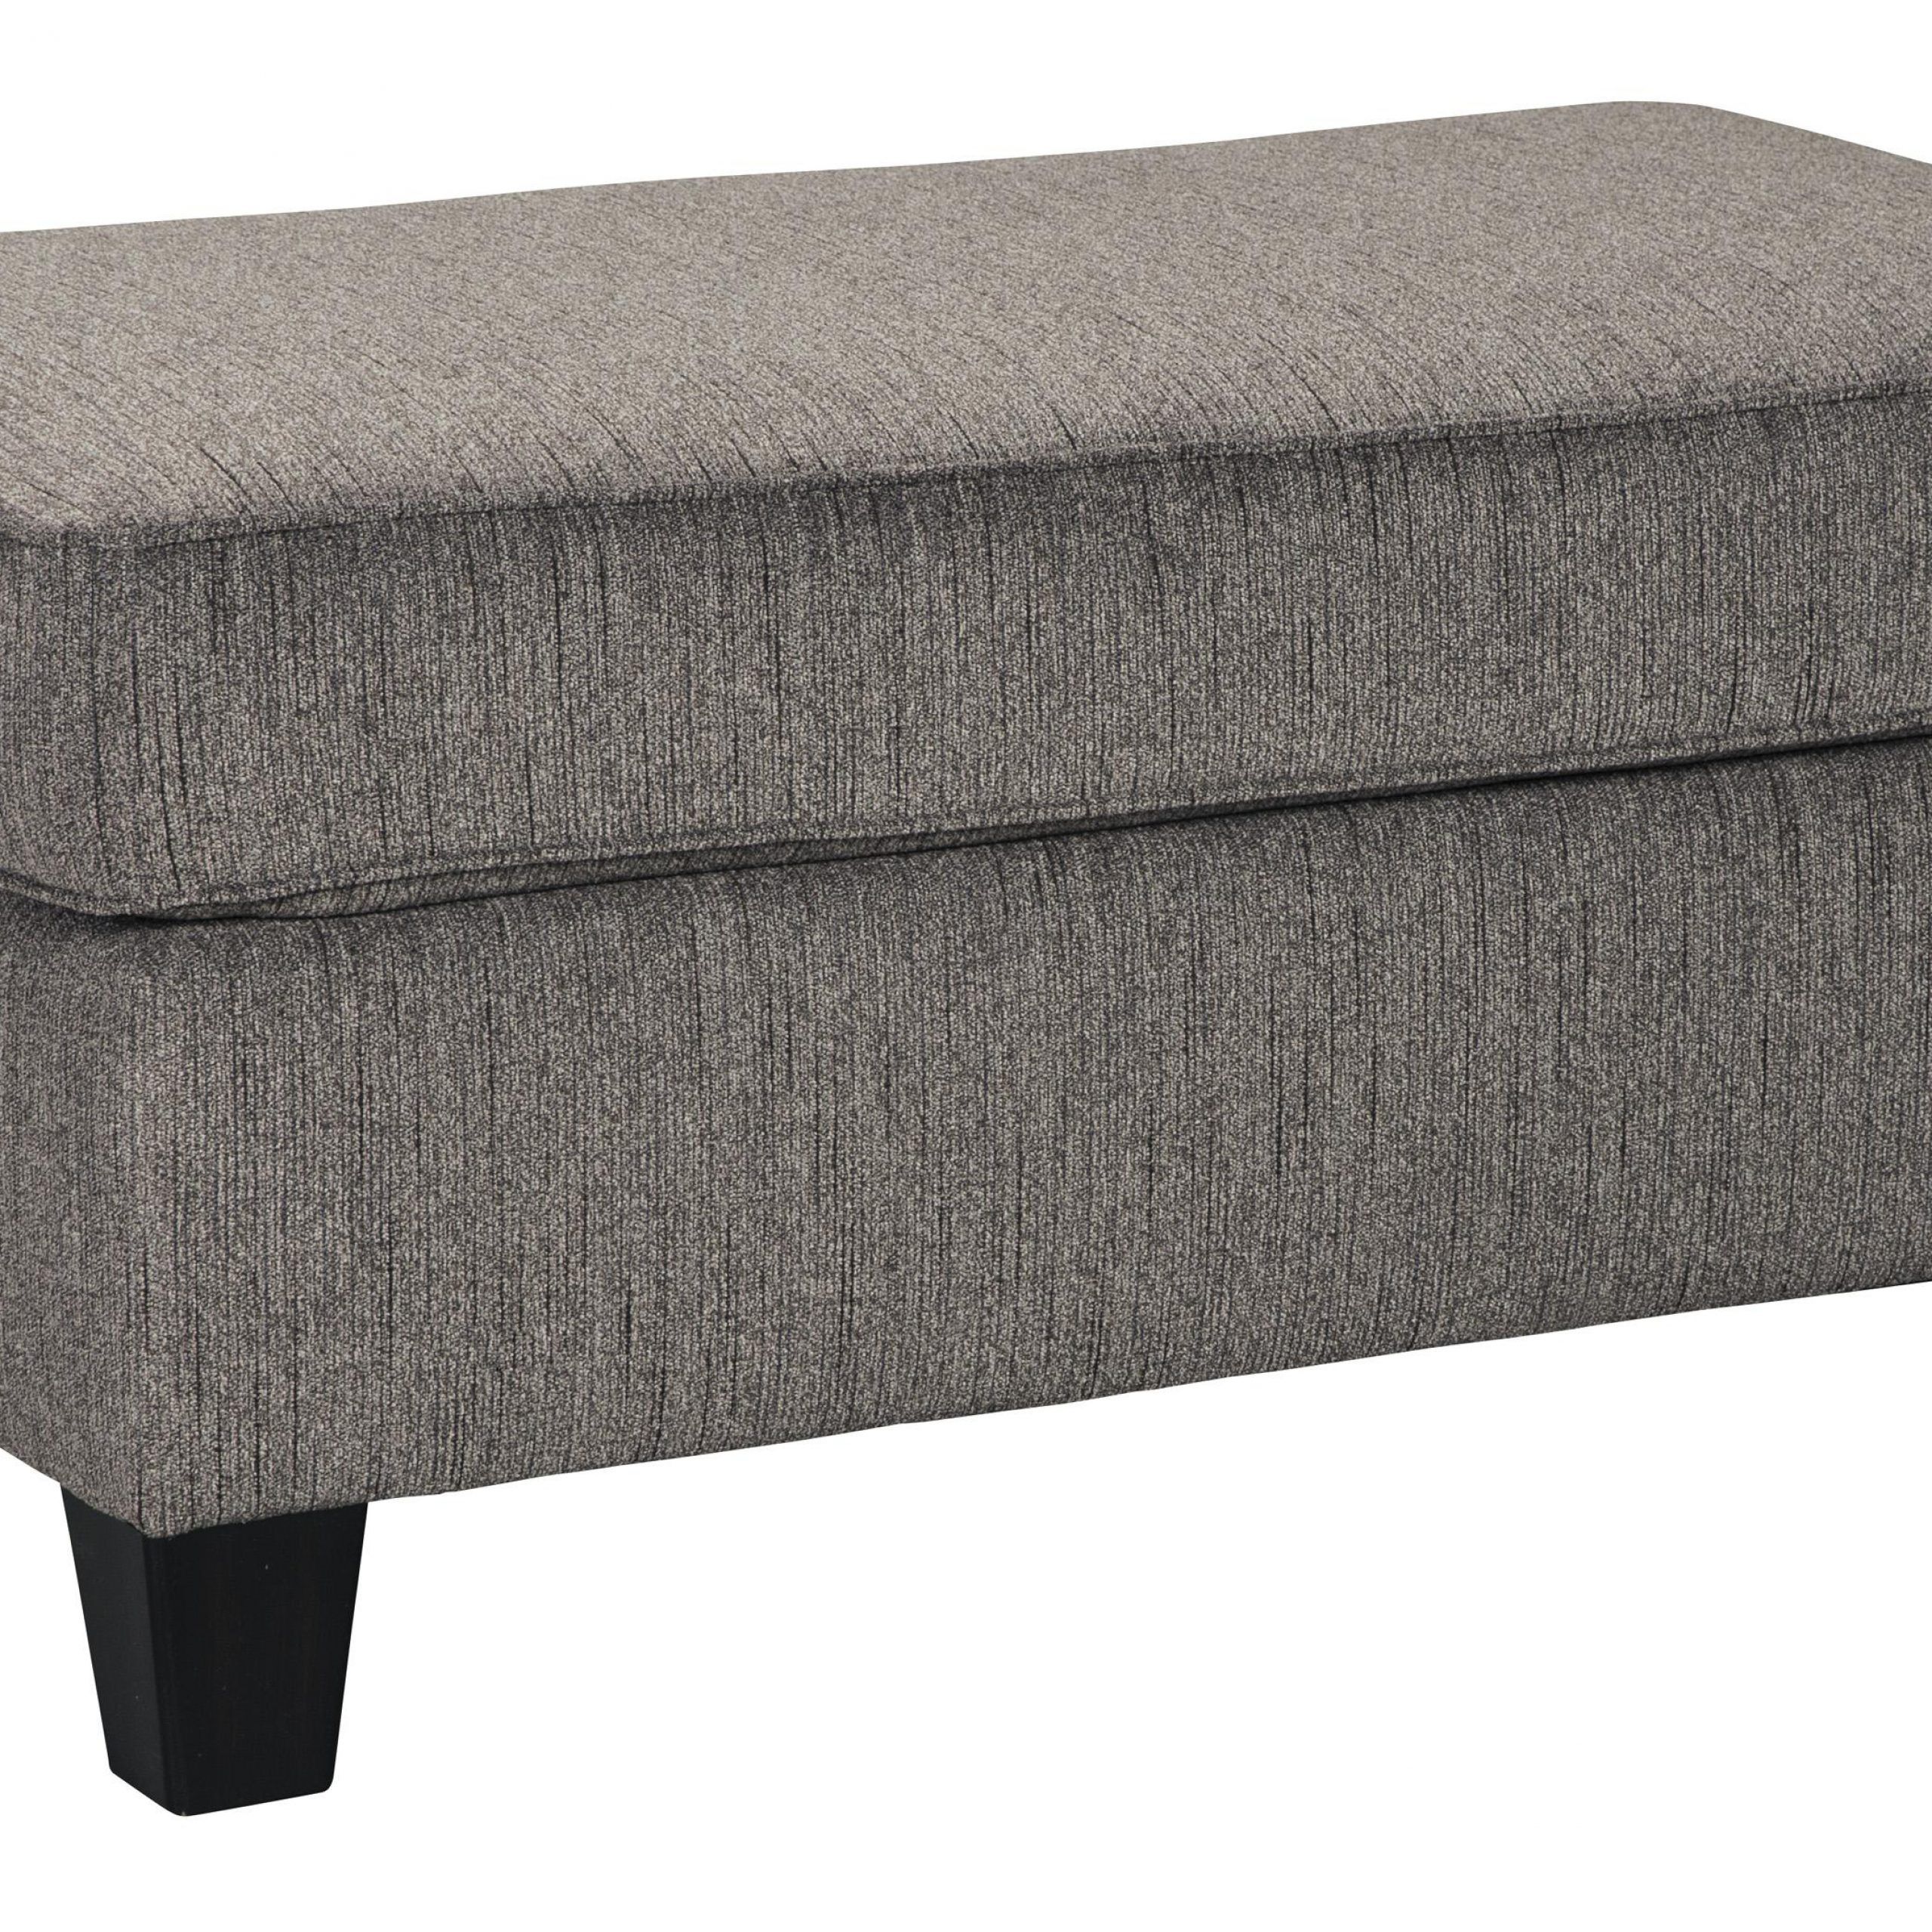 Fabric Upholstered Wooden Ottoman With Tapered Legs, Gray And Black Regarding Dark Red And Cream Woven Pouf Ottomans (View 16 of 20)